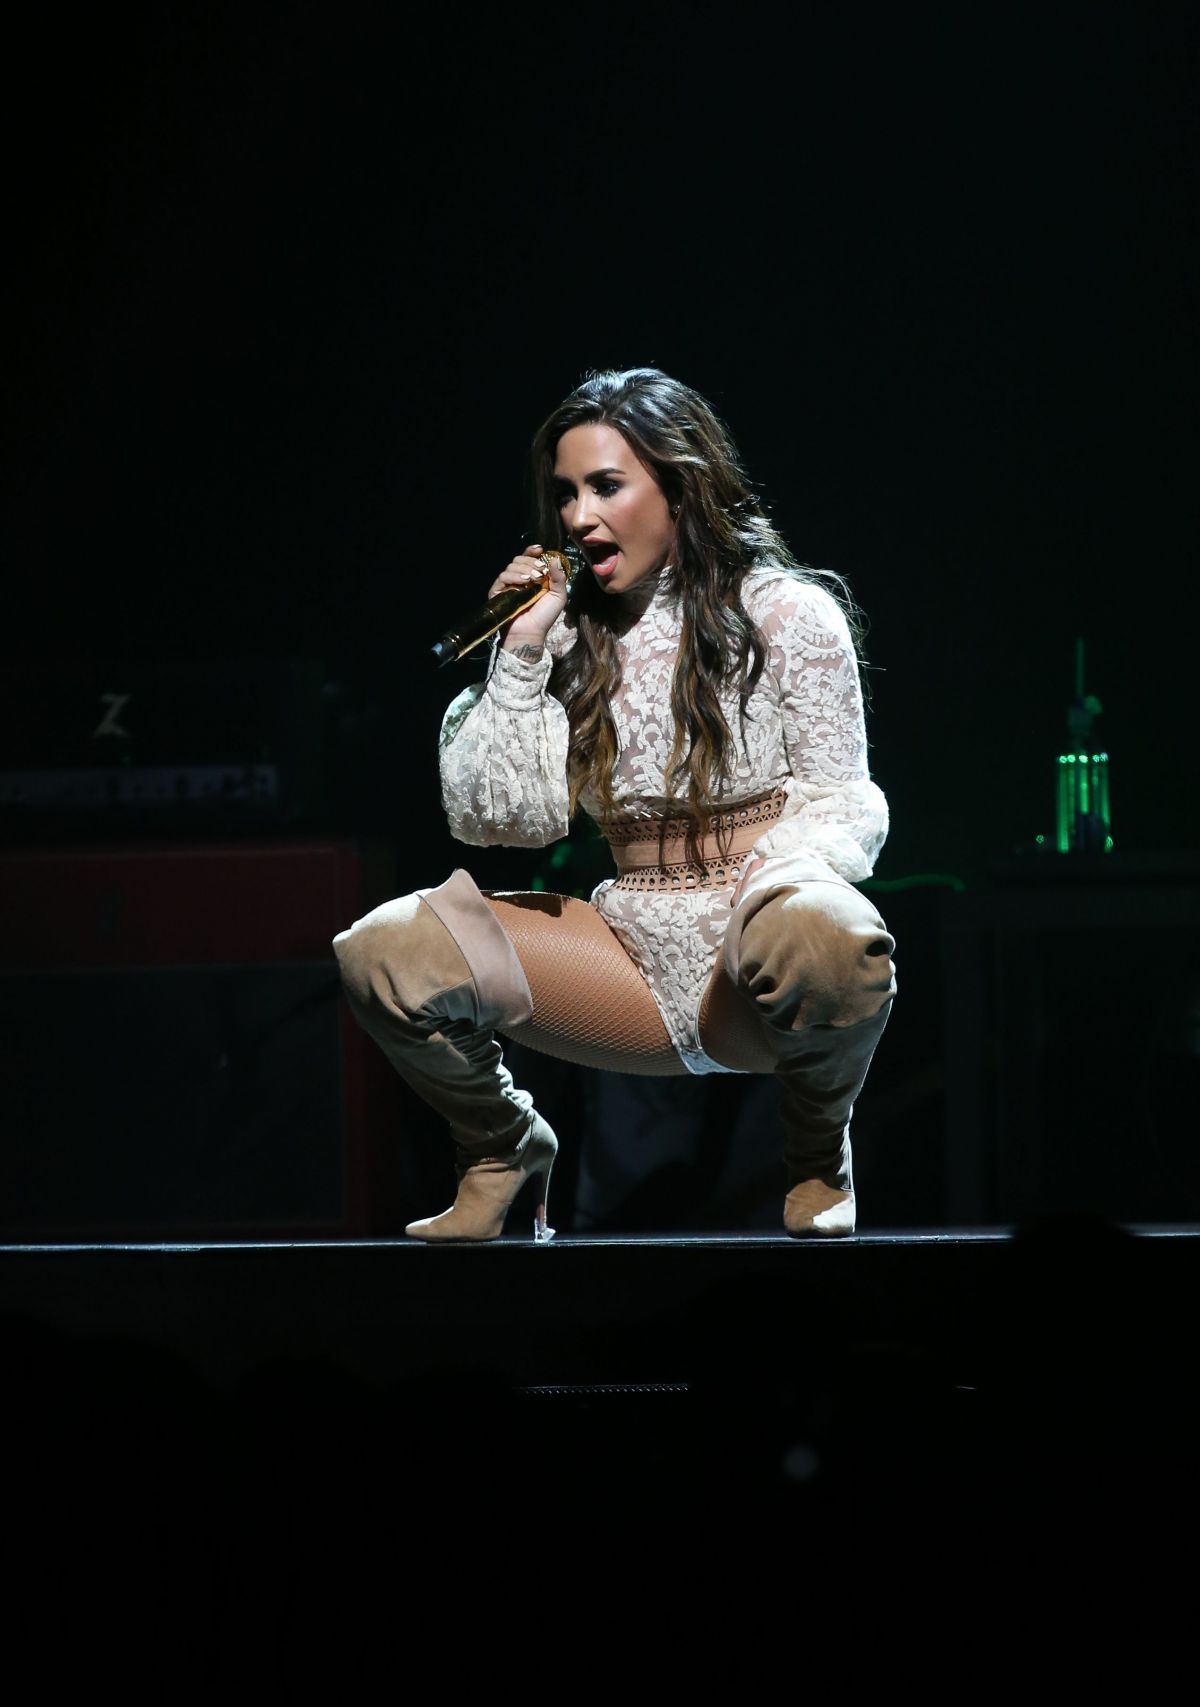 DEMI LOVATO Performs at a Concert in Nashville 09/07/2016 – HawtCelebs